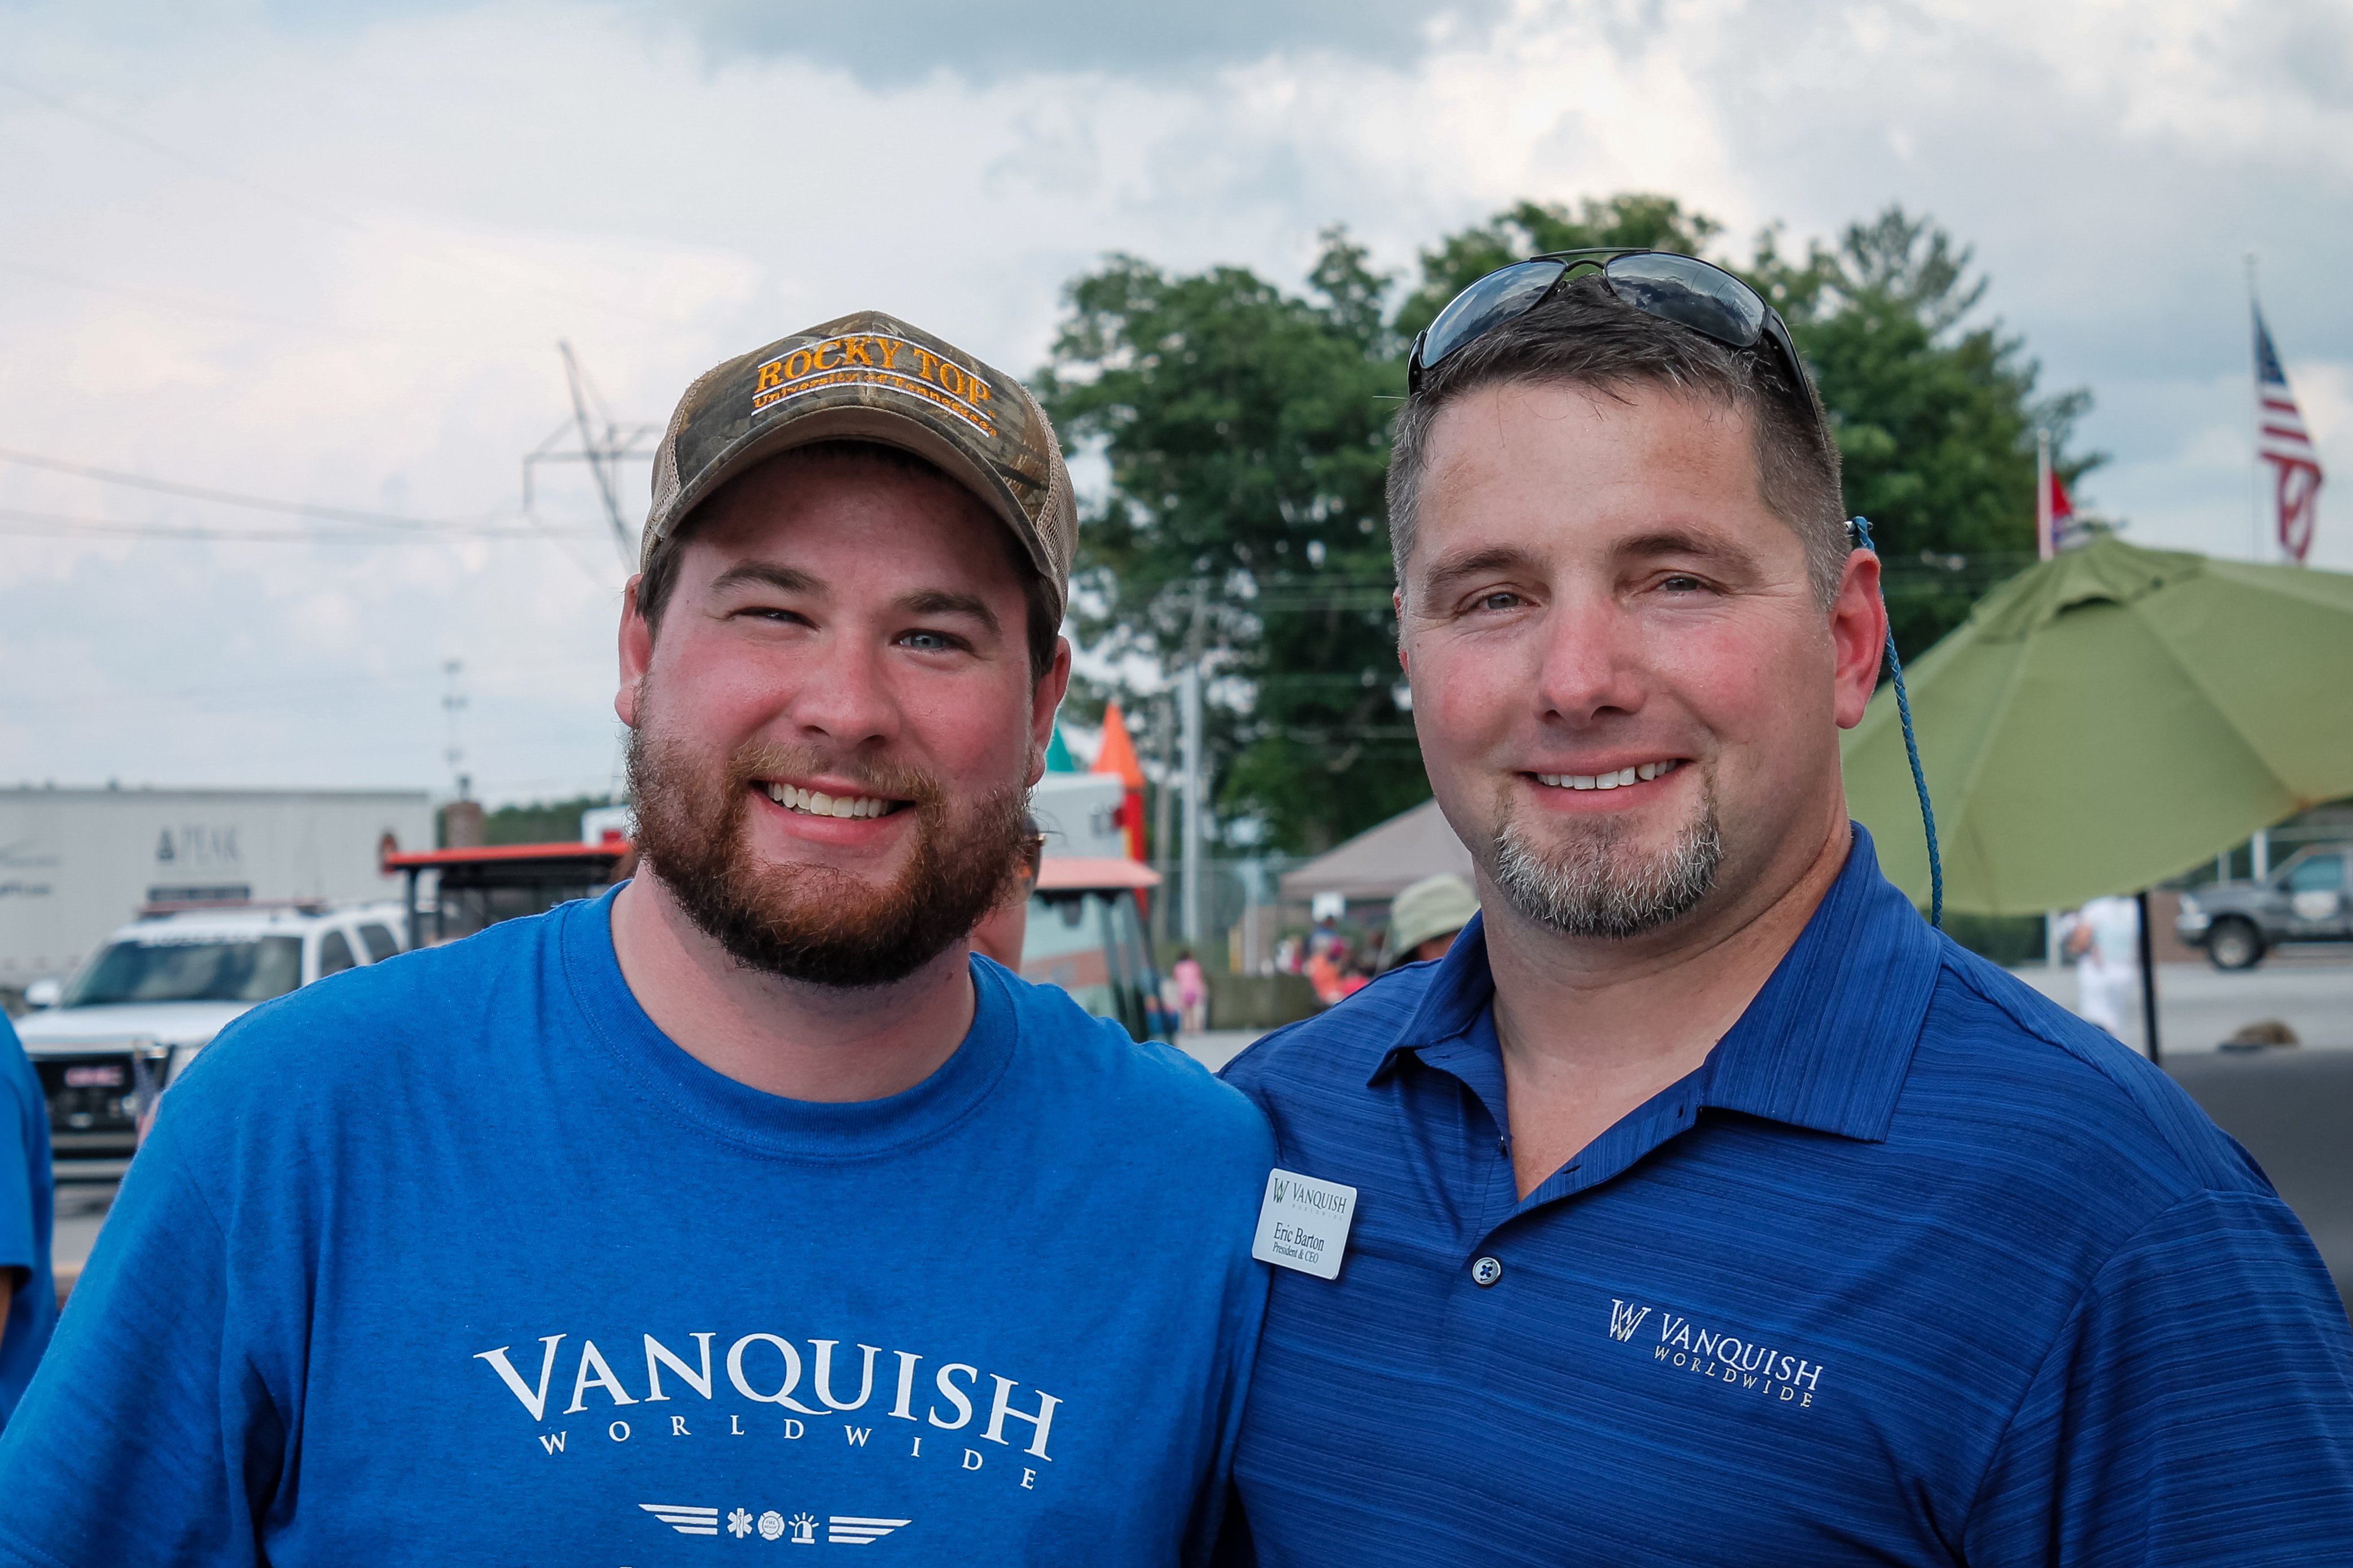 Cody and Eric Barton pose for a photo during an Honoring Our Heroes event for law enforcement, firefighters and EMTs in 2015. The event was hosted by sister companies Vanquish Worldwide, LexLin Gypsy Ranch, Peak Technical Institute and Front Range Training and Consulting.